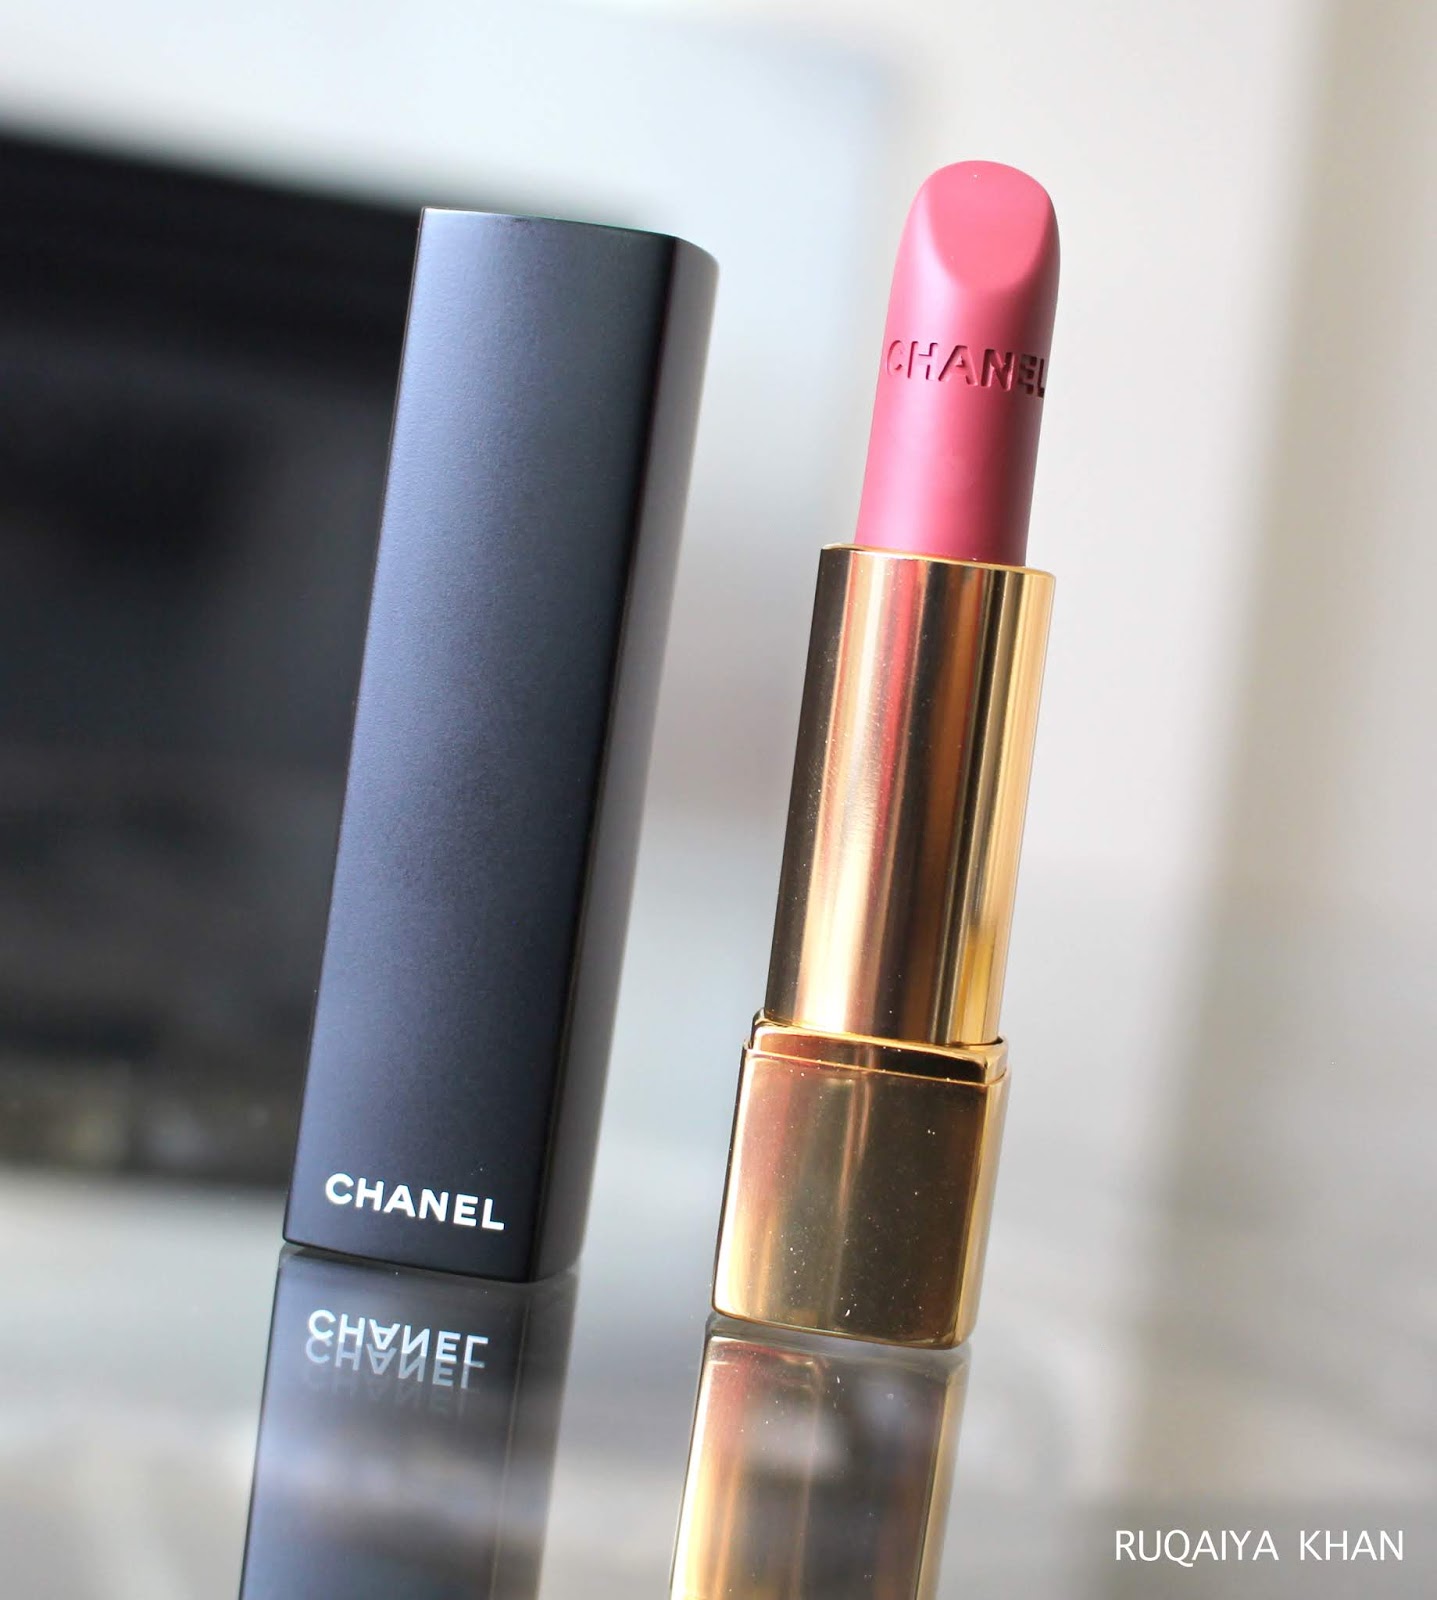 Ruqaiya Khan: CHANEL NUDE LIPSTICKS - Rouge Allure Velvet in 69 Abstrait &  Rouge Coco in Mademoiselle - Review with Swatches